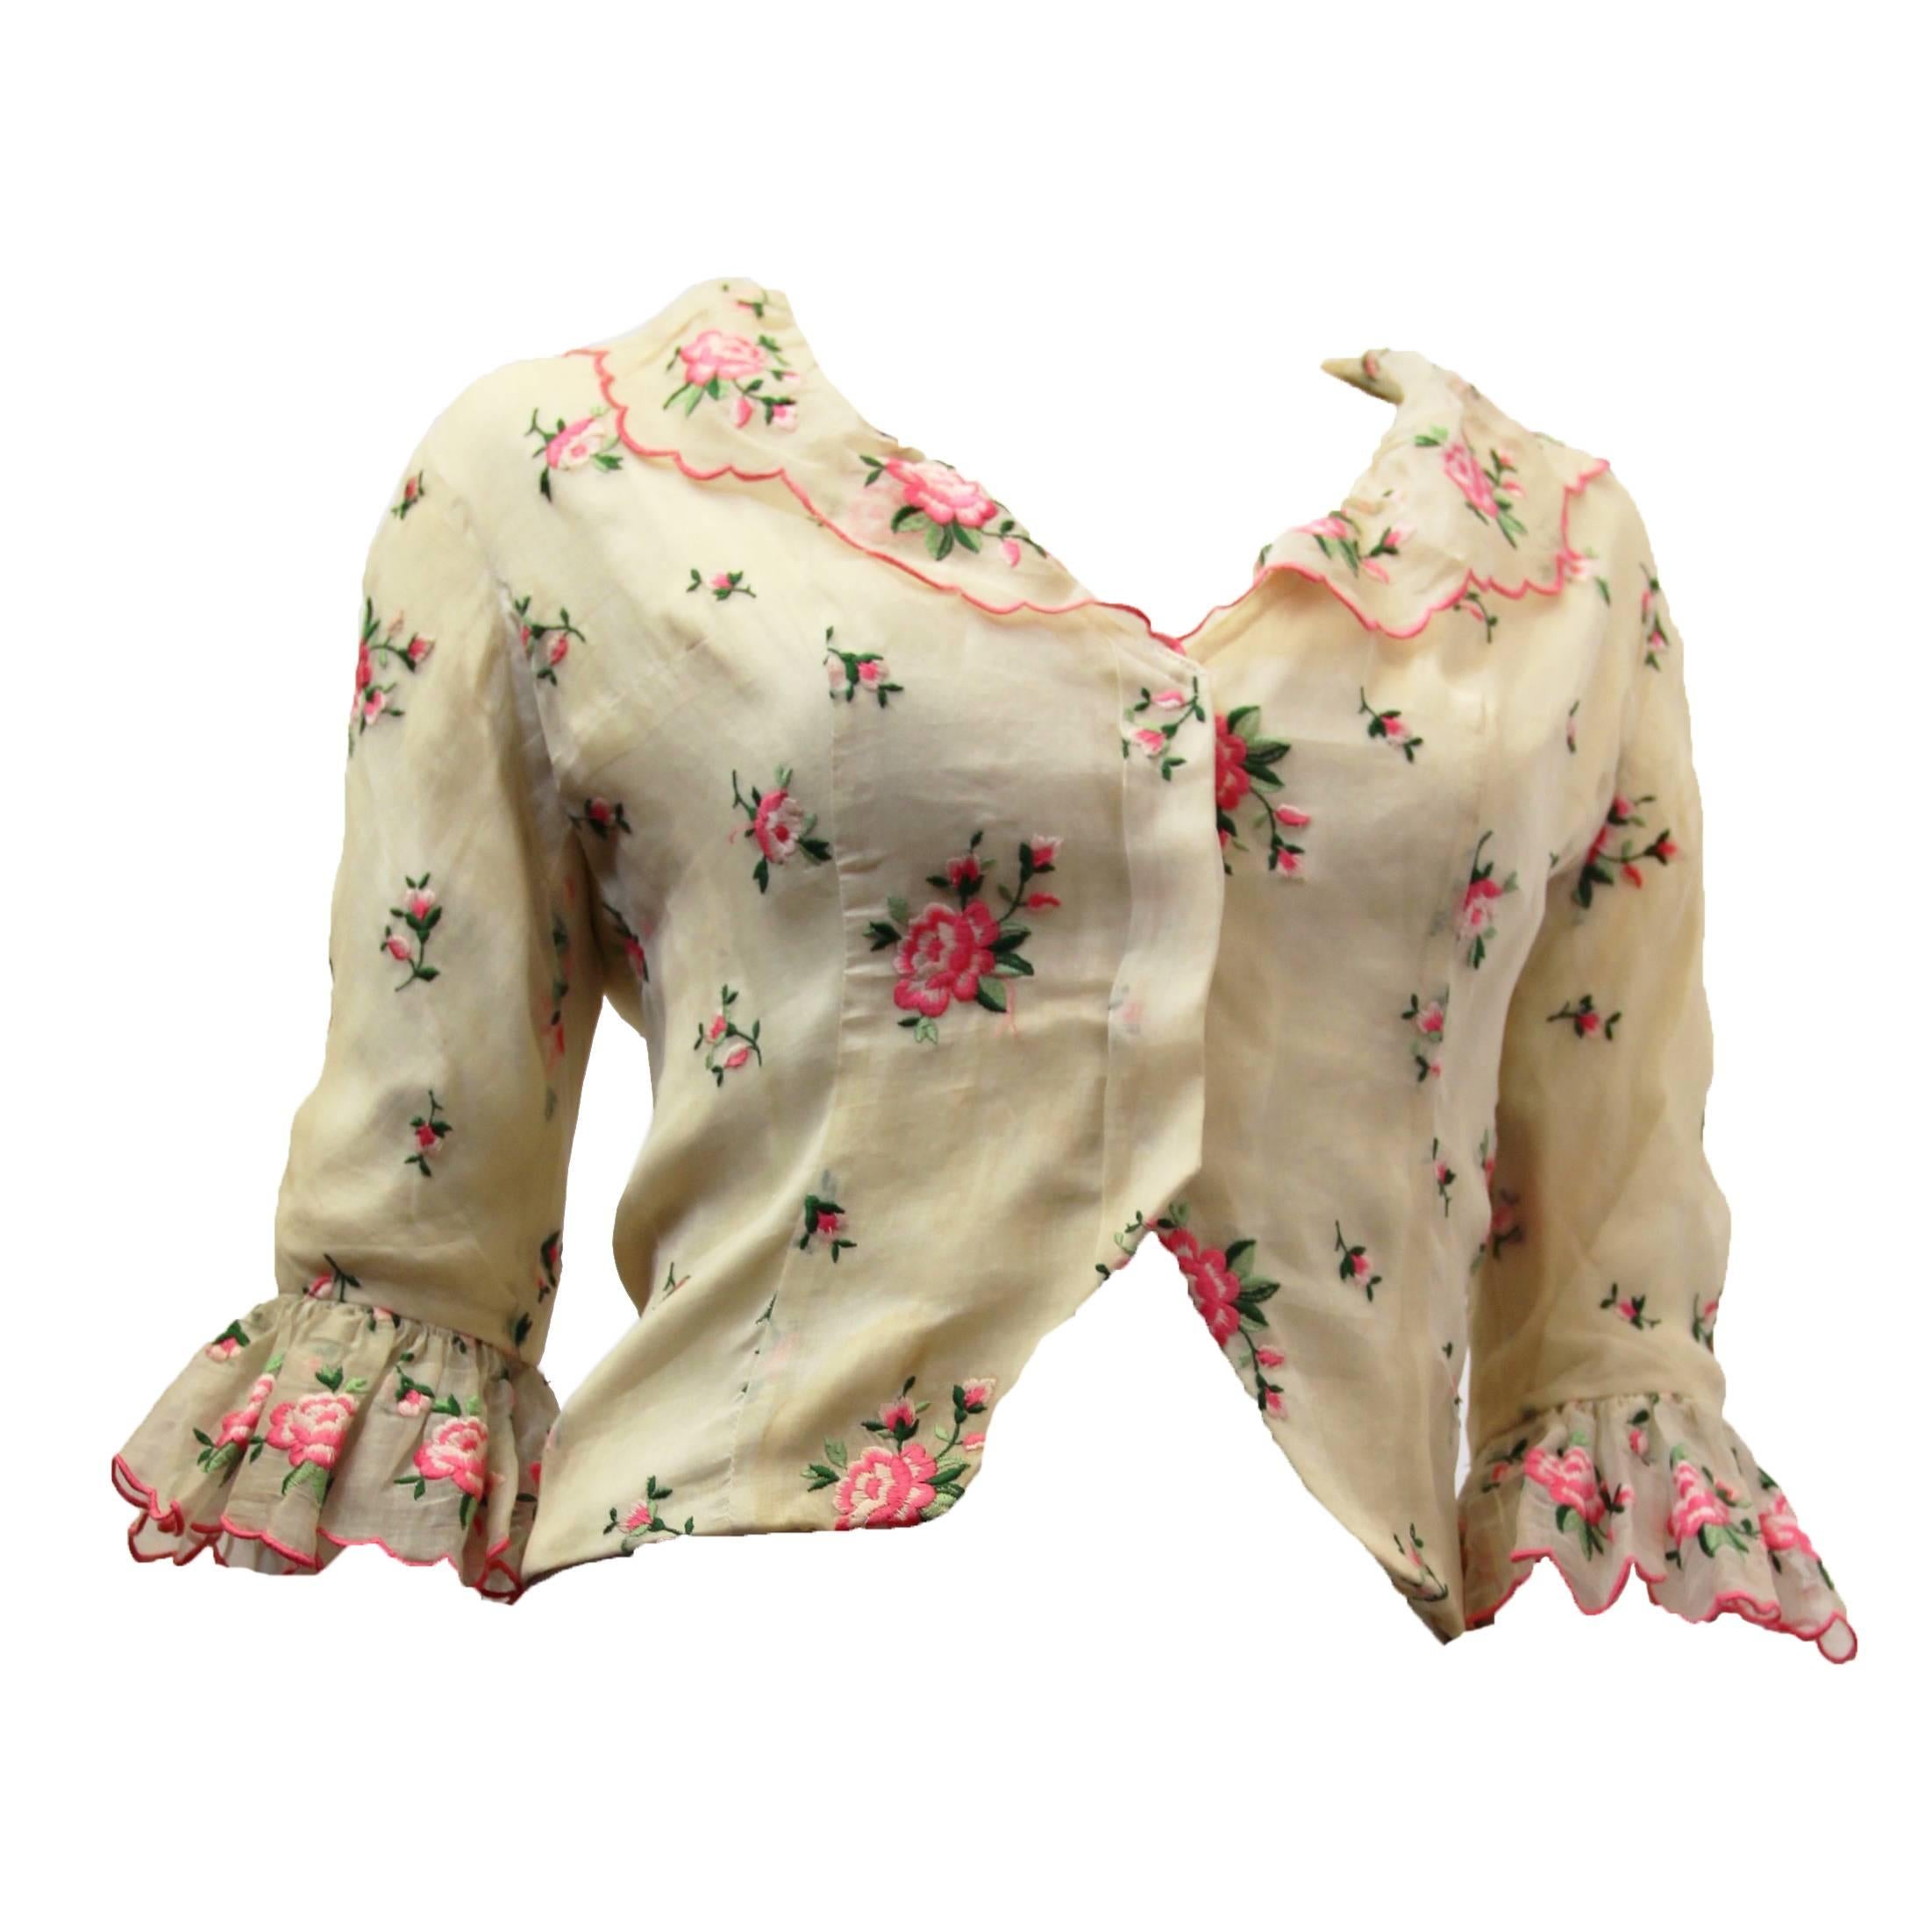 50s Castillo Organdy Rose Embroidered Blouse with Ruffle Collar and Cuffs